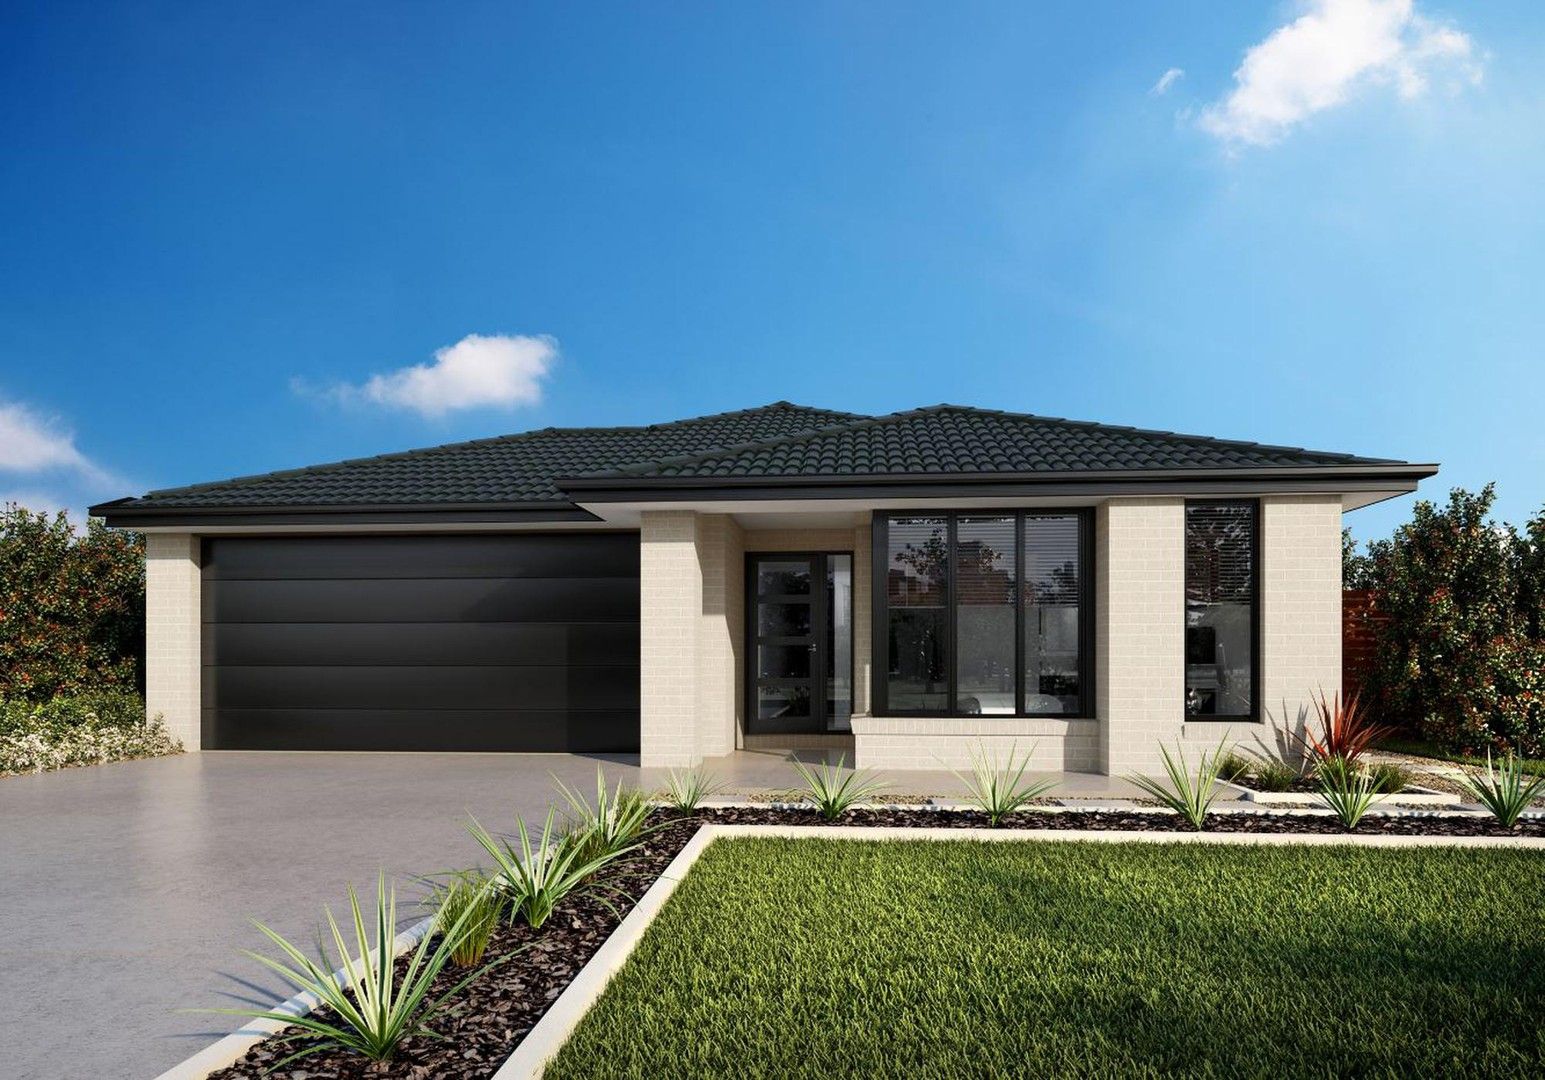 3 bedrooms New House & Land in 2417 Riverfield Square Estate CLYDE NORTH VIC, 3978